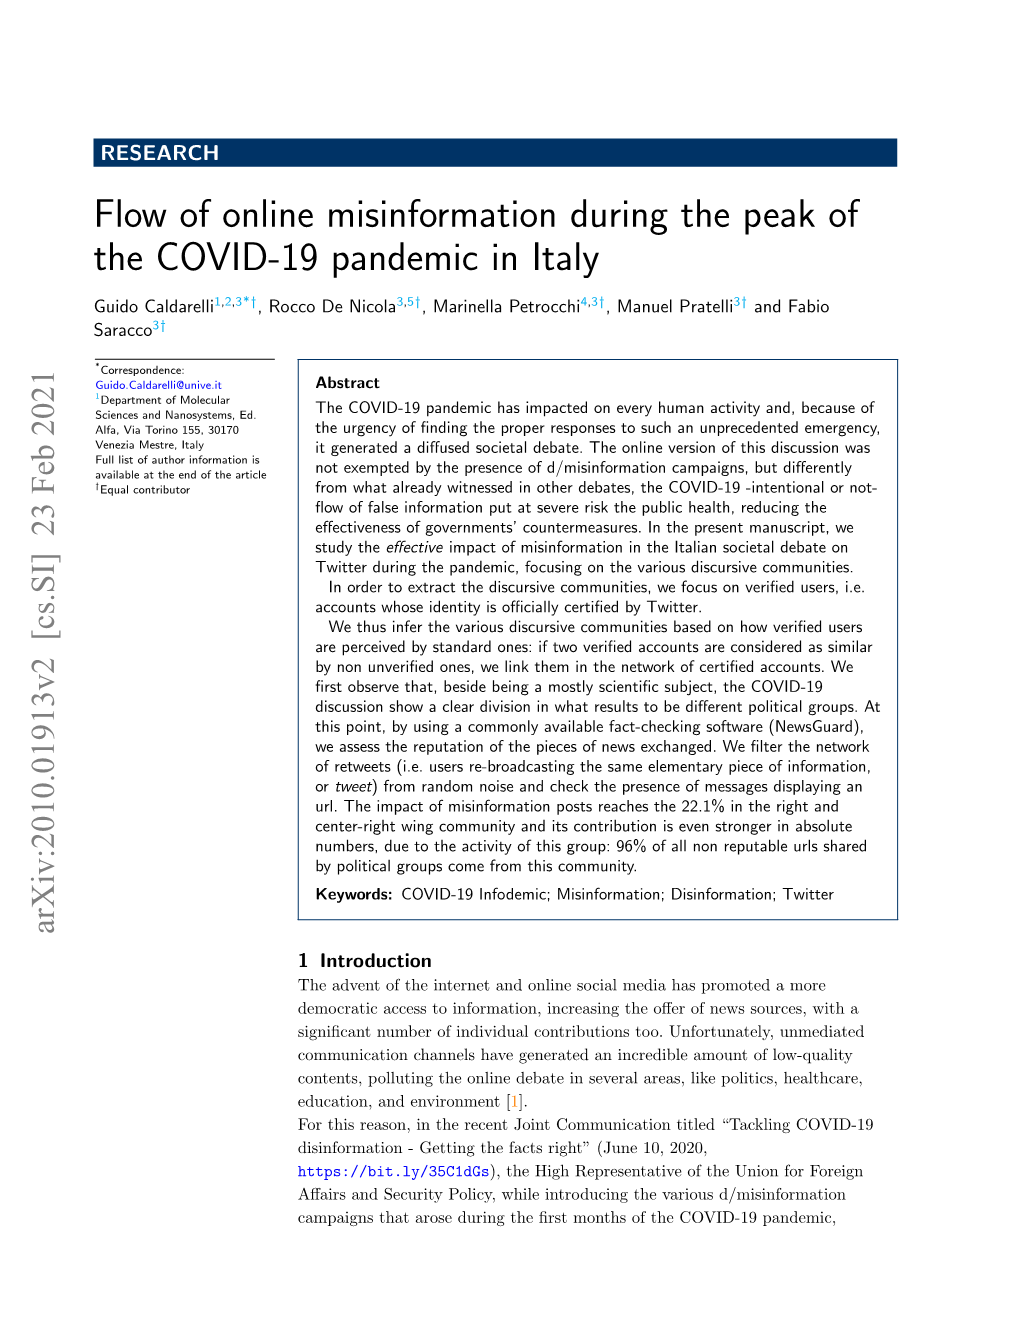 Flow of Online Misinformation During the Peak of the COVID-19 Pandemic in Italy